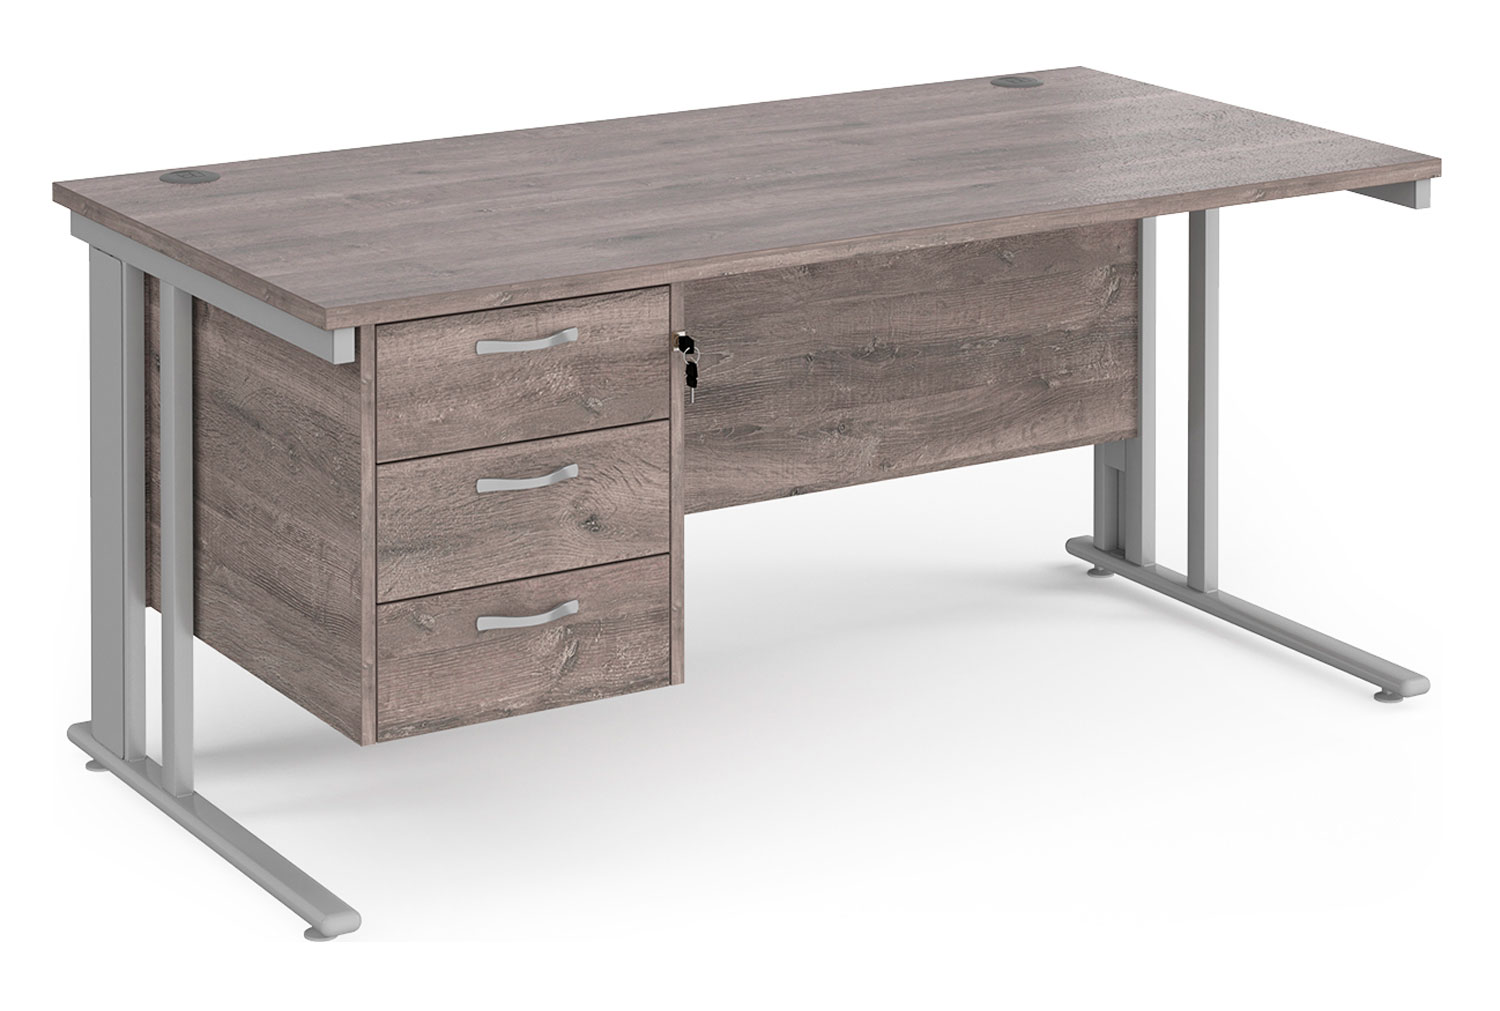 Value Line Deluxe Cable Managed Rectangular Office Desk 3 Drawers (Silver Legs), 160wx80dx73h (cm), Grey Oak, Express Delivery